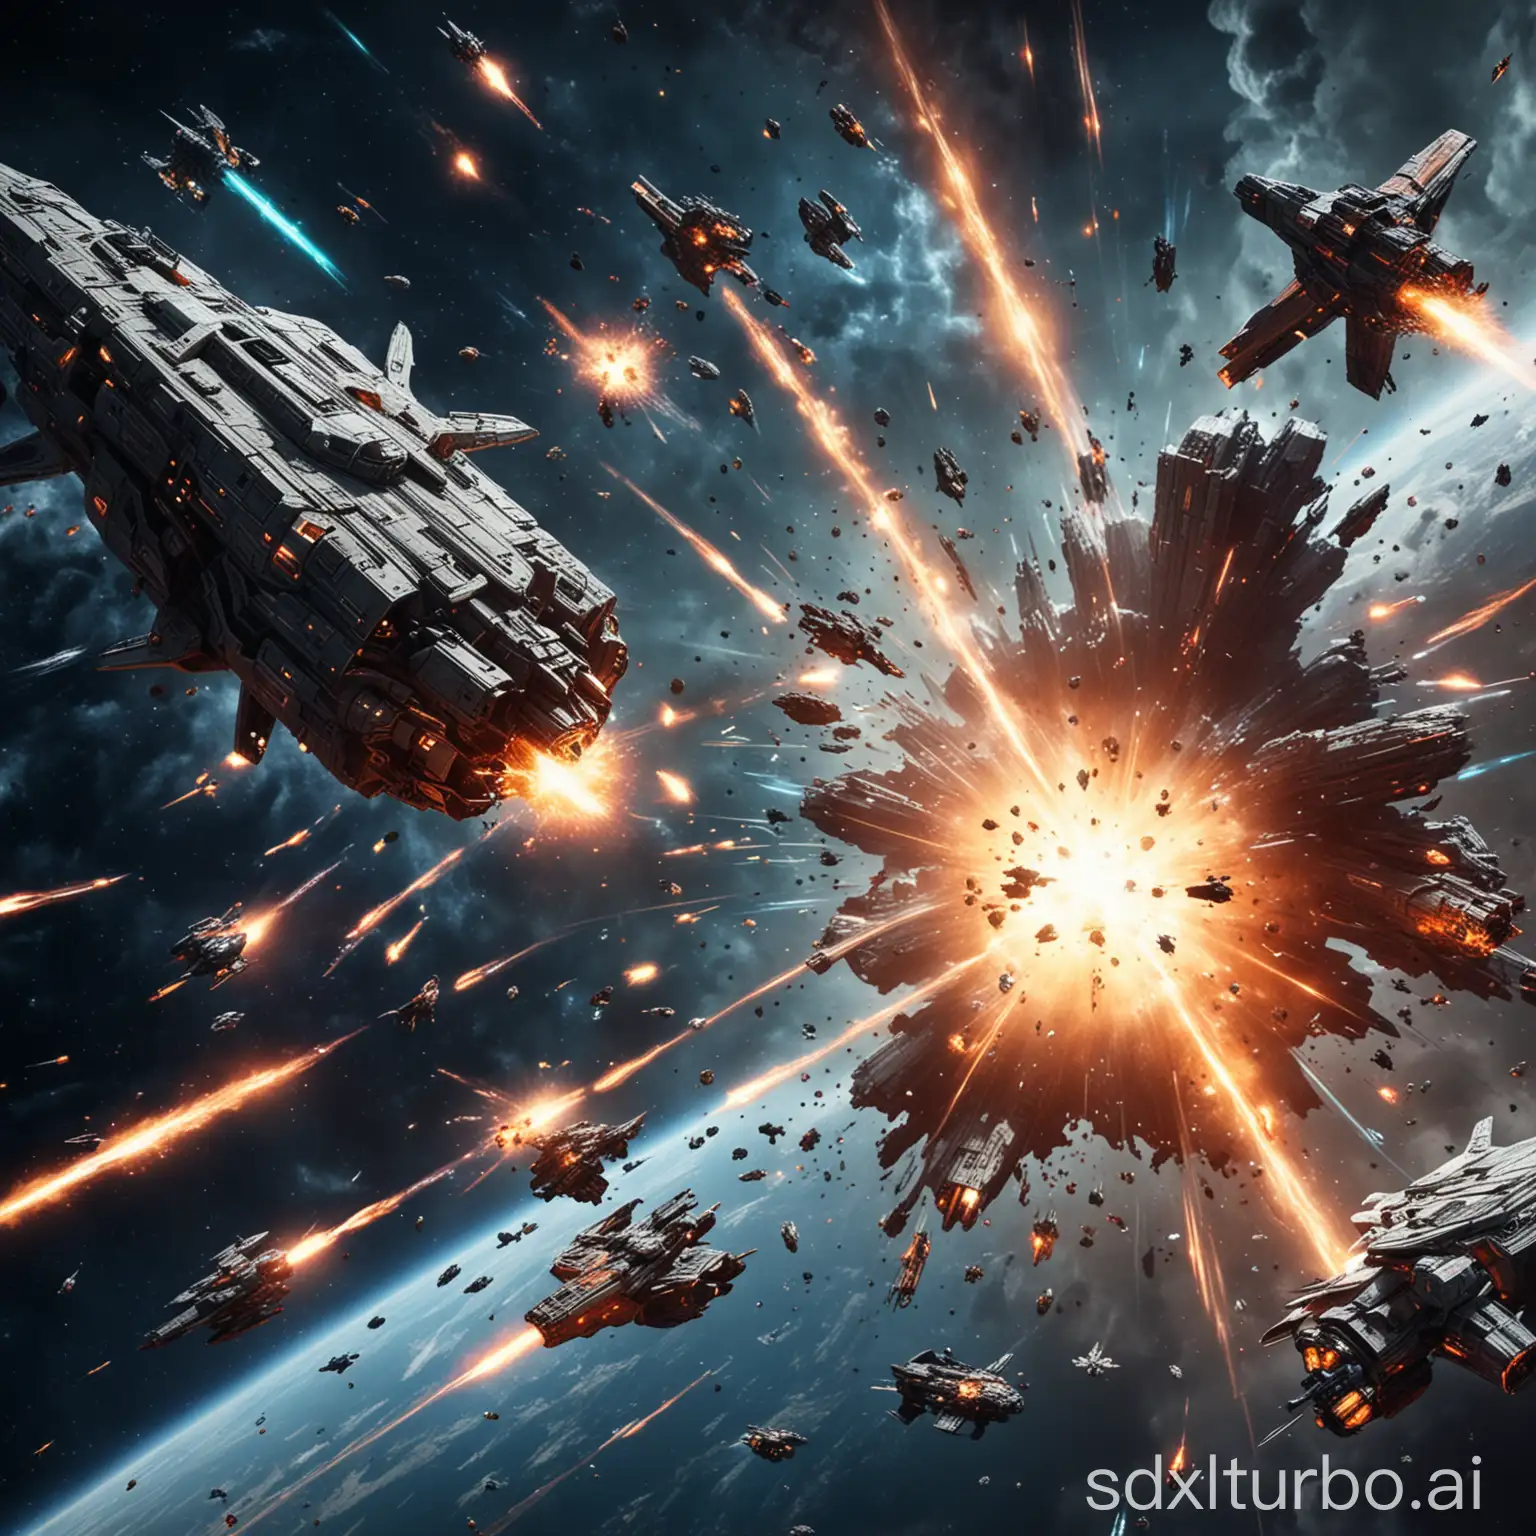 Intense-Space-Battle-Scene-with-Explosions-and-Laser-Fire